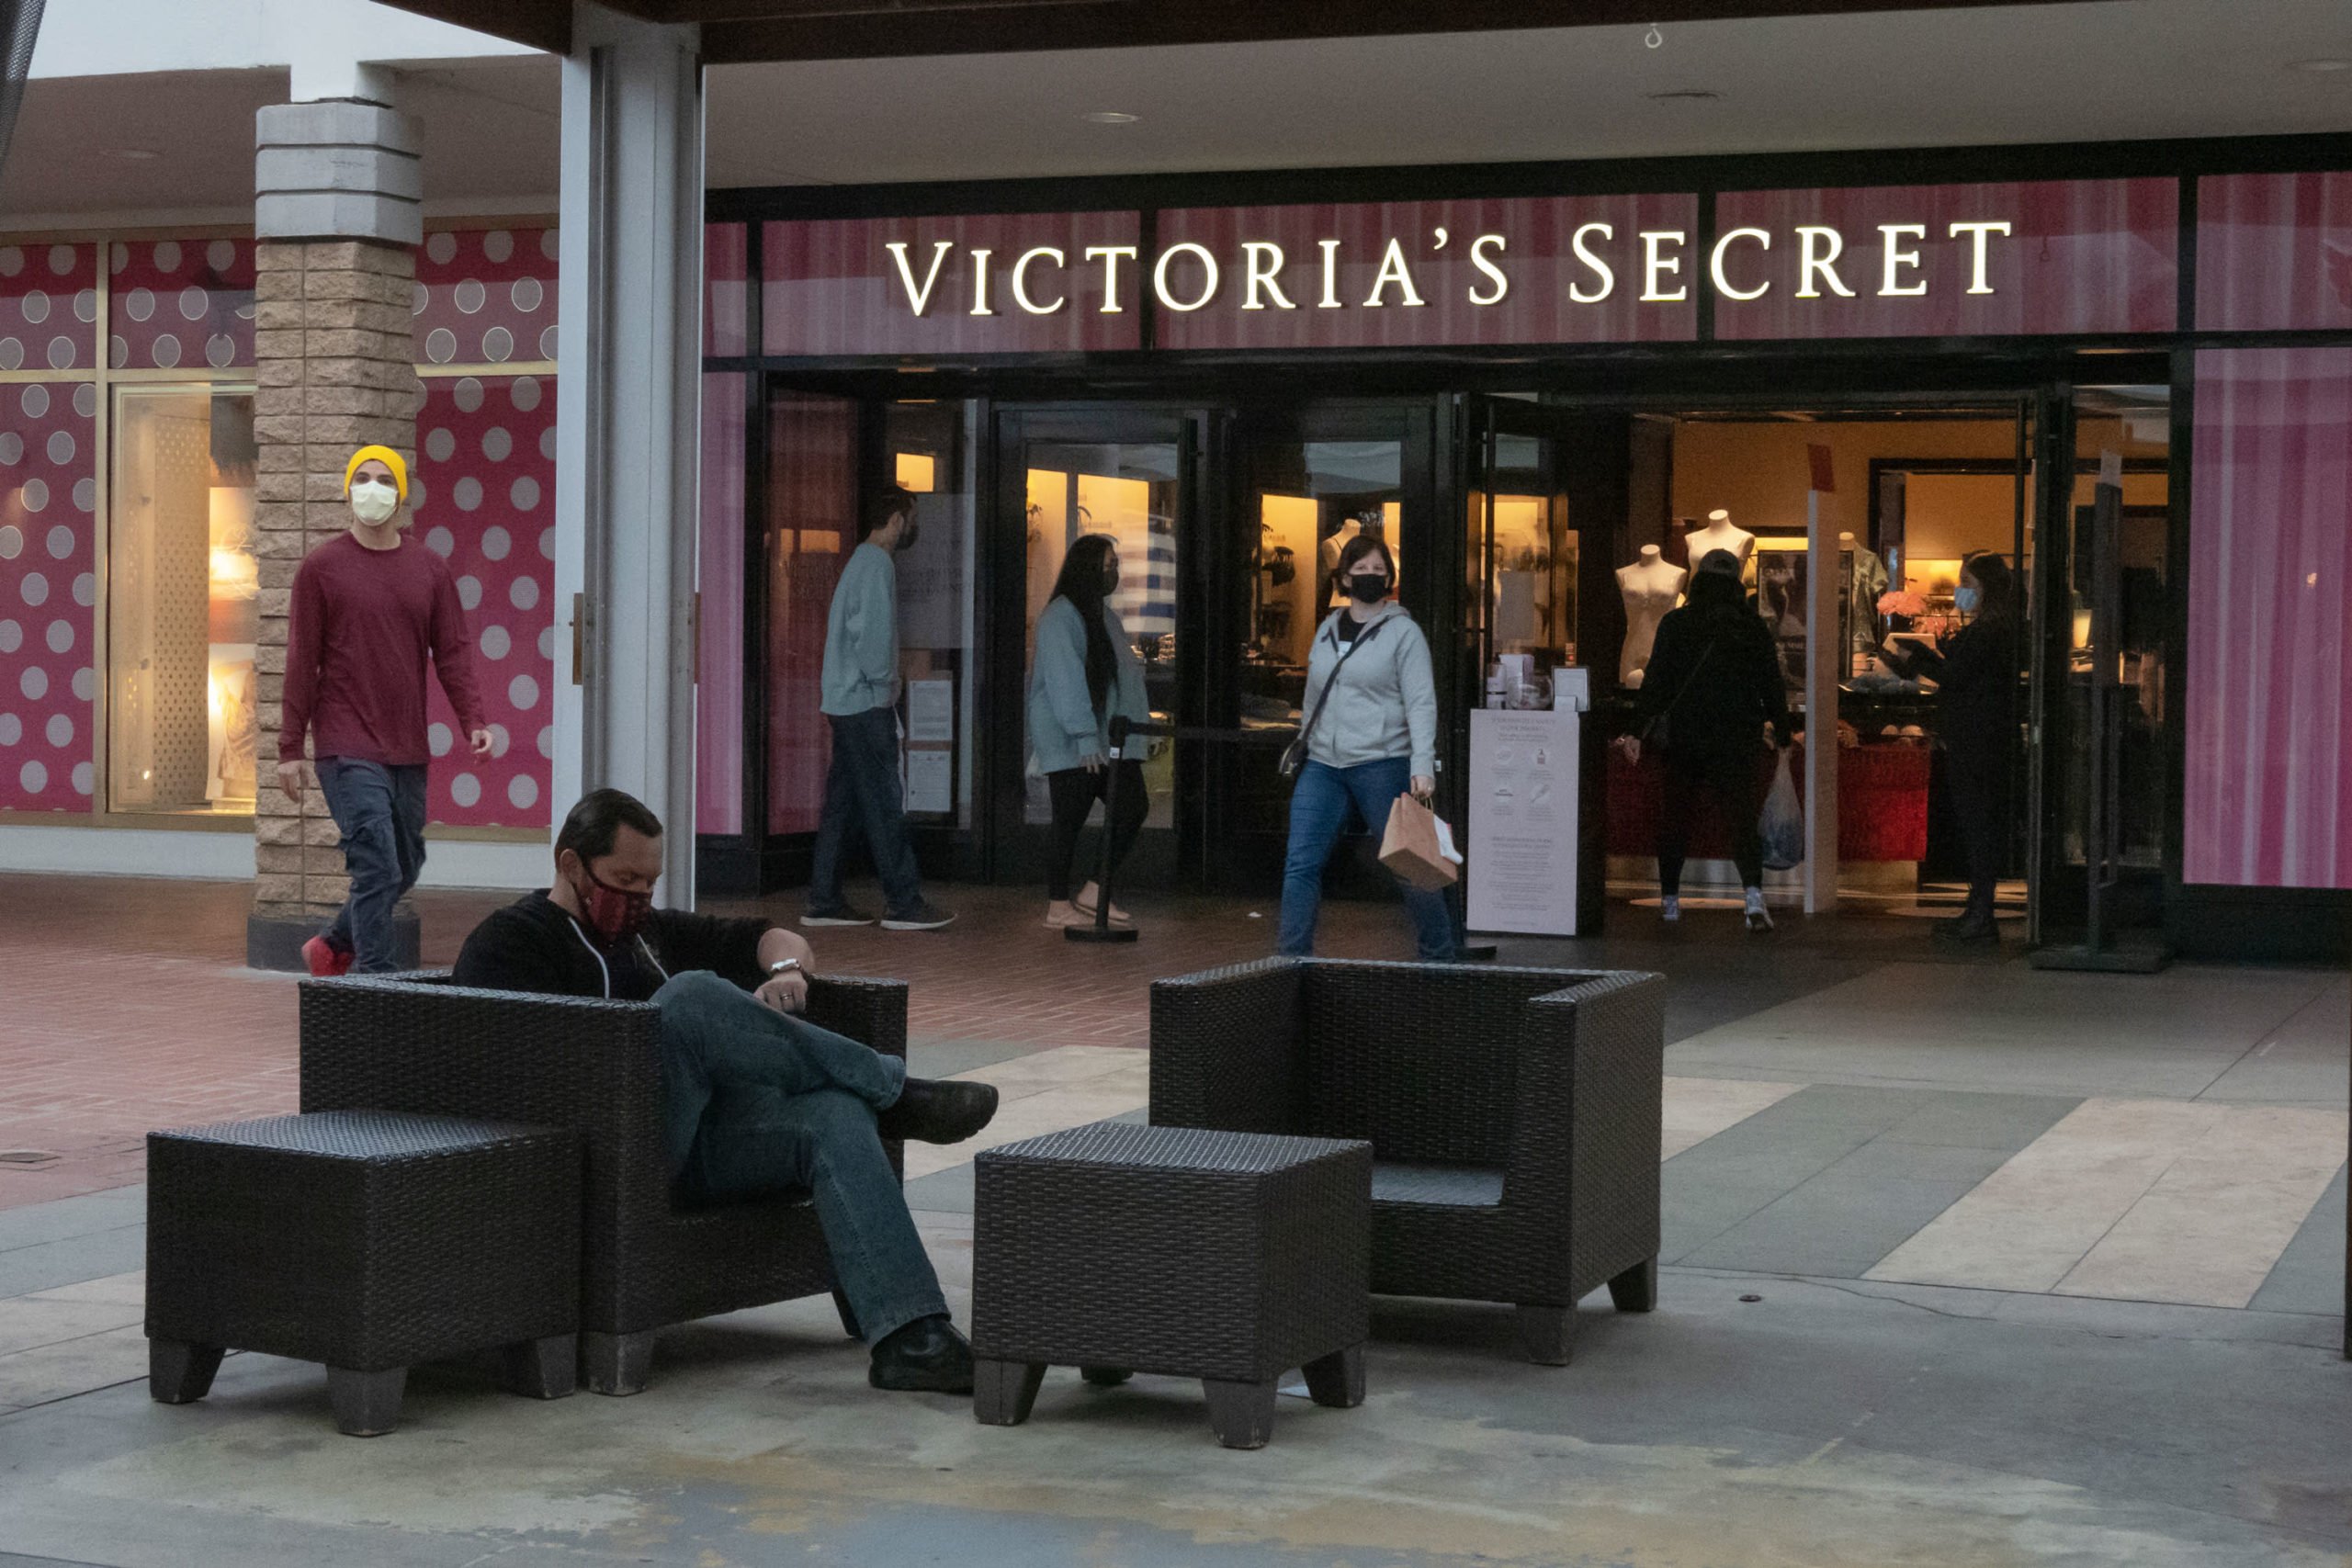 Victoria’s Secret shares rise on share buyback plans, holiday sales growth